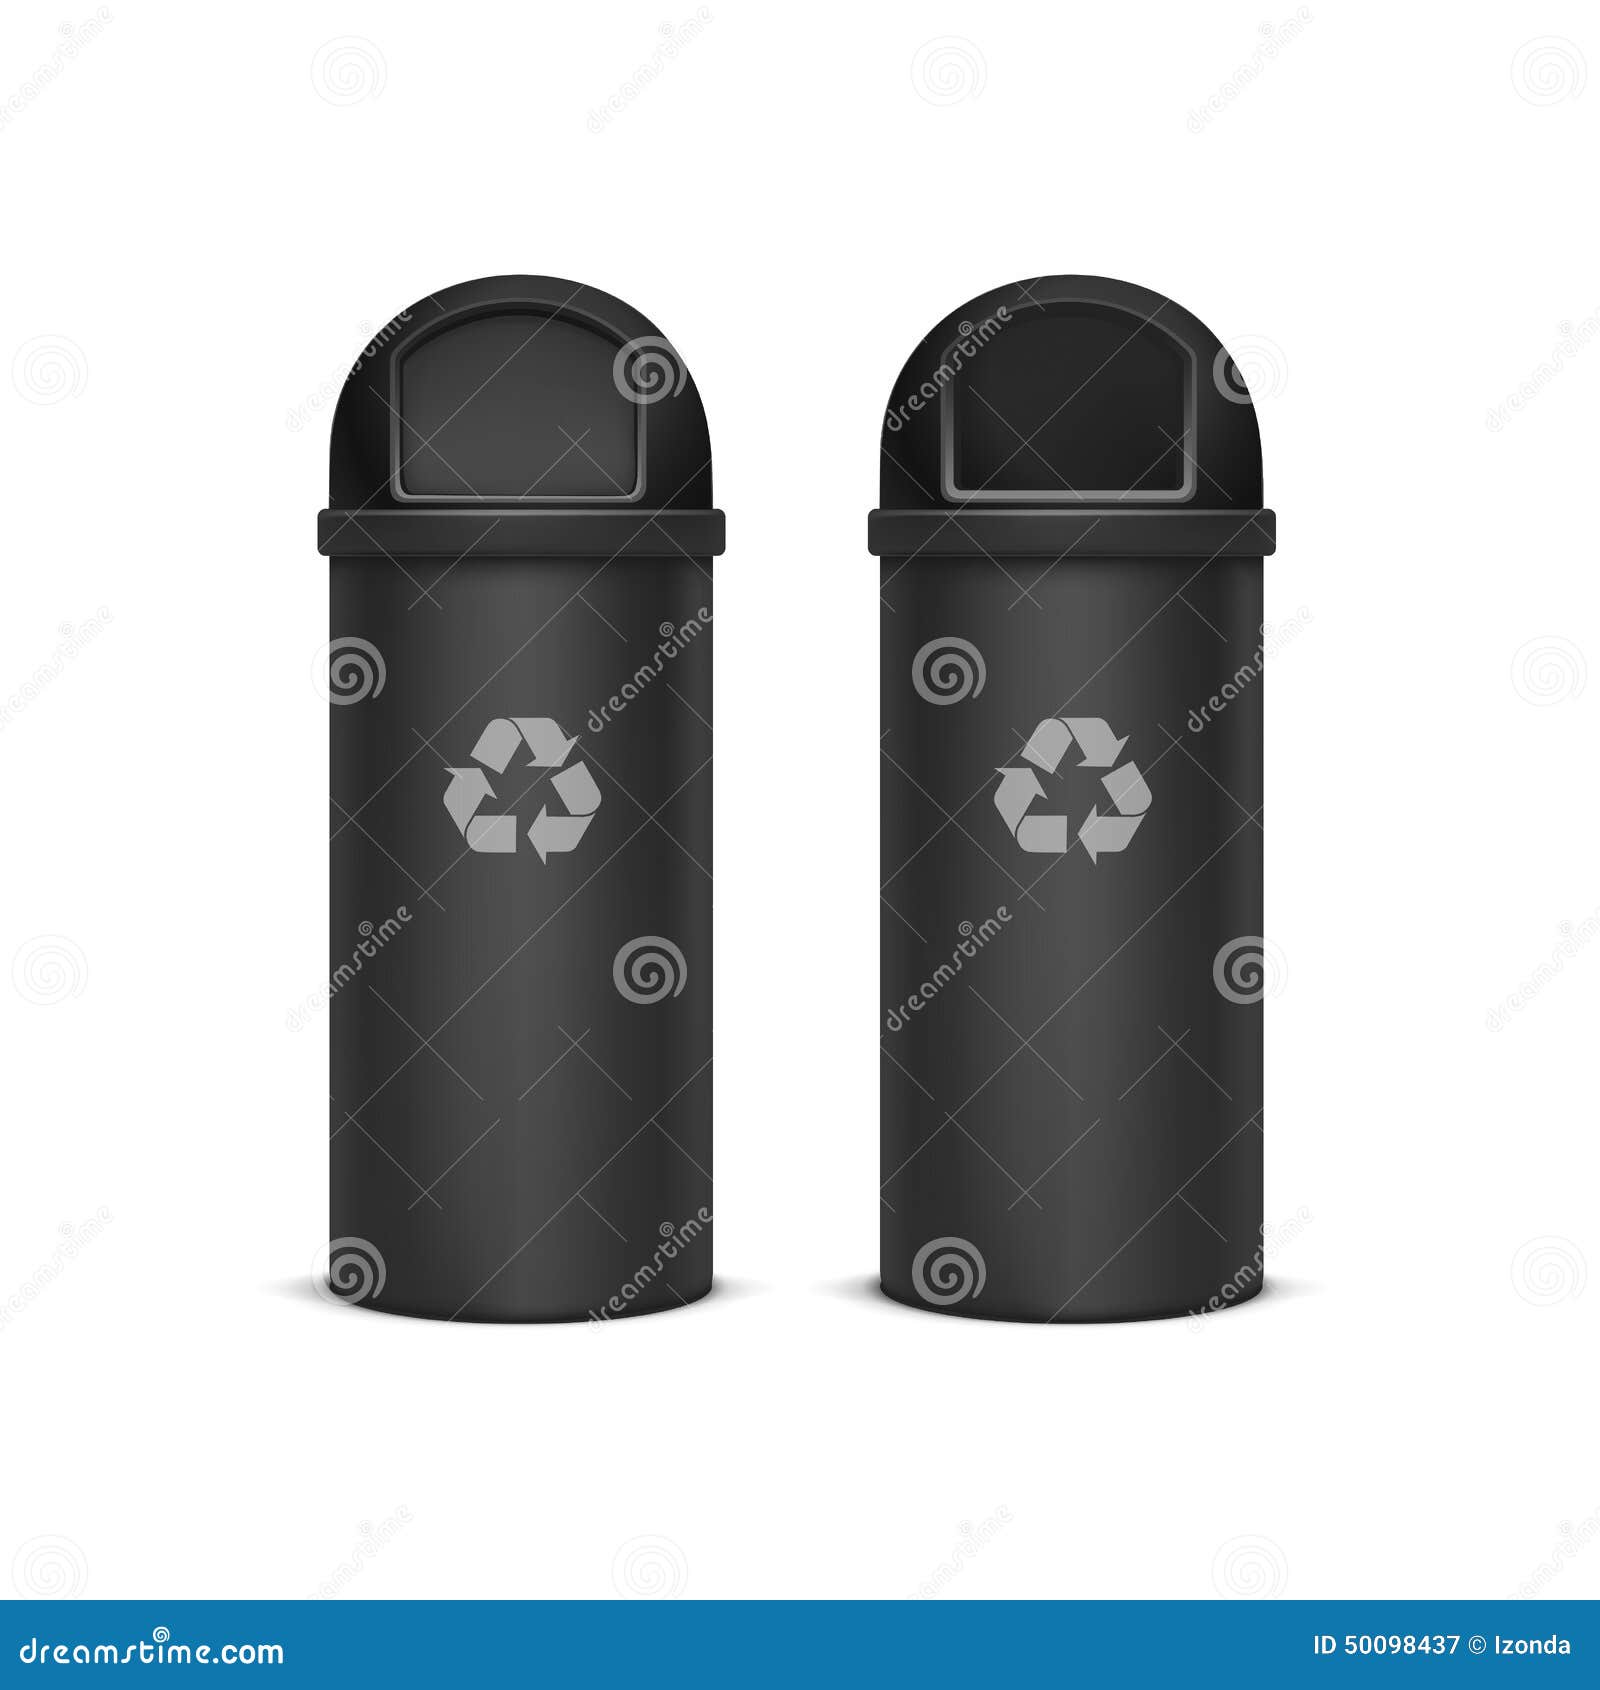 https://thumbs.dreamstime.com/z/vector-recycle-bins-trash-garbage-isolated-white-background-50098437.jpg